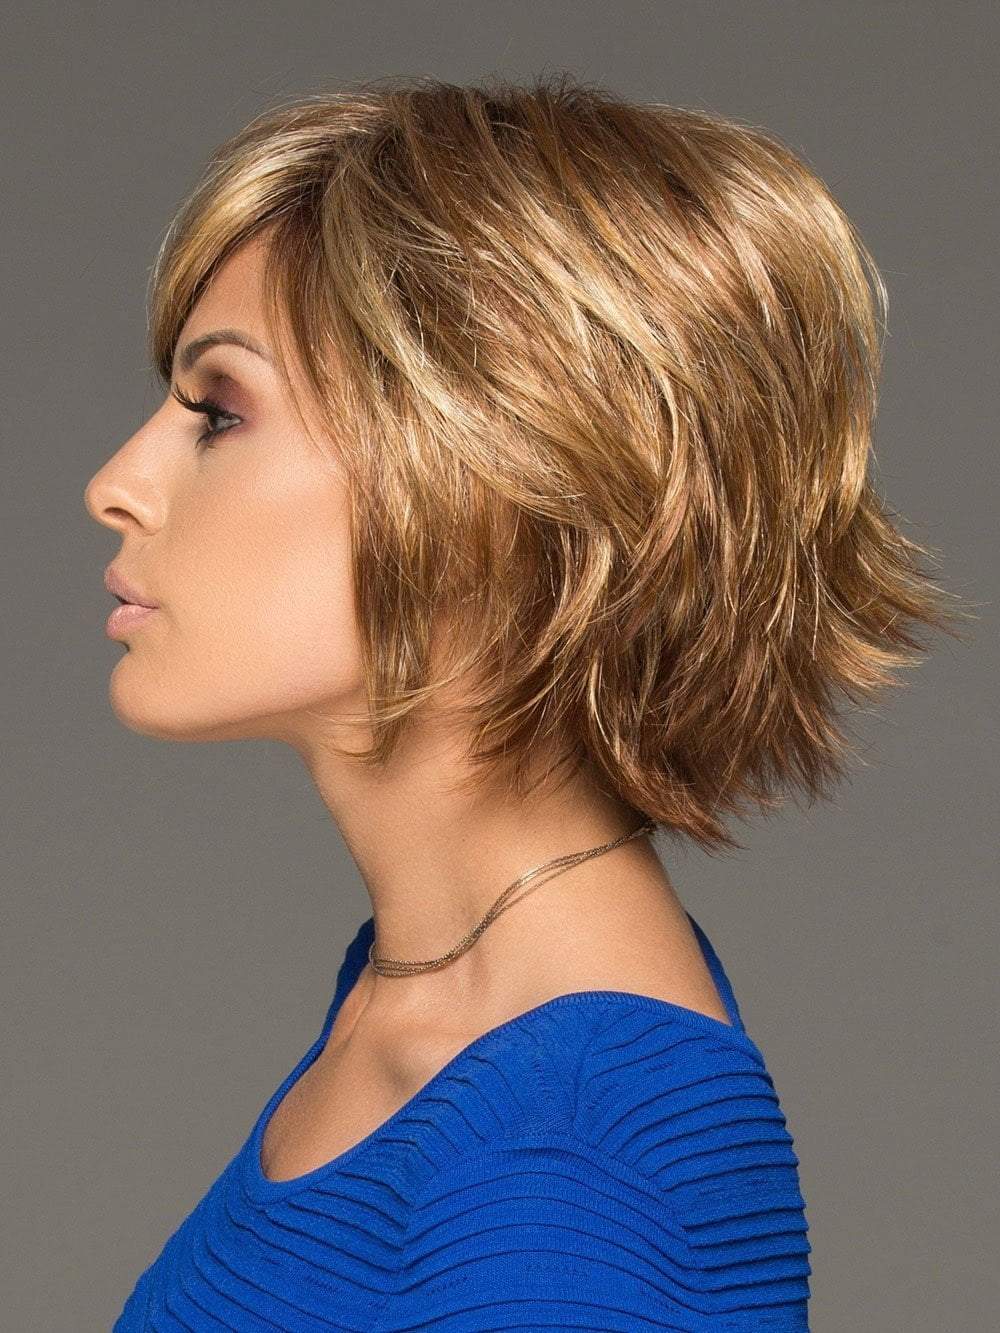 The longer sidepieces and fringe can be cut or trimmed by your stylist. This short wig is full of layers, flips, and angles